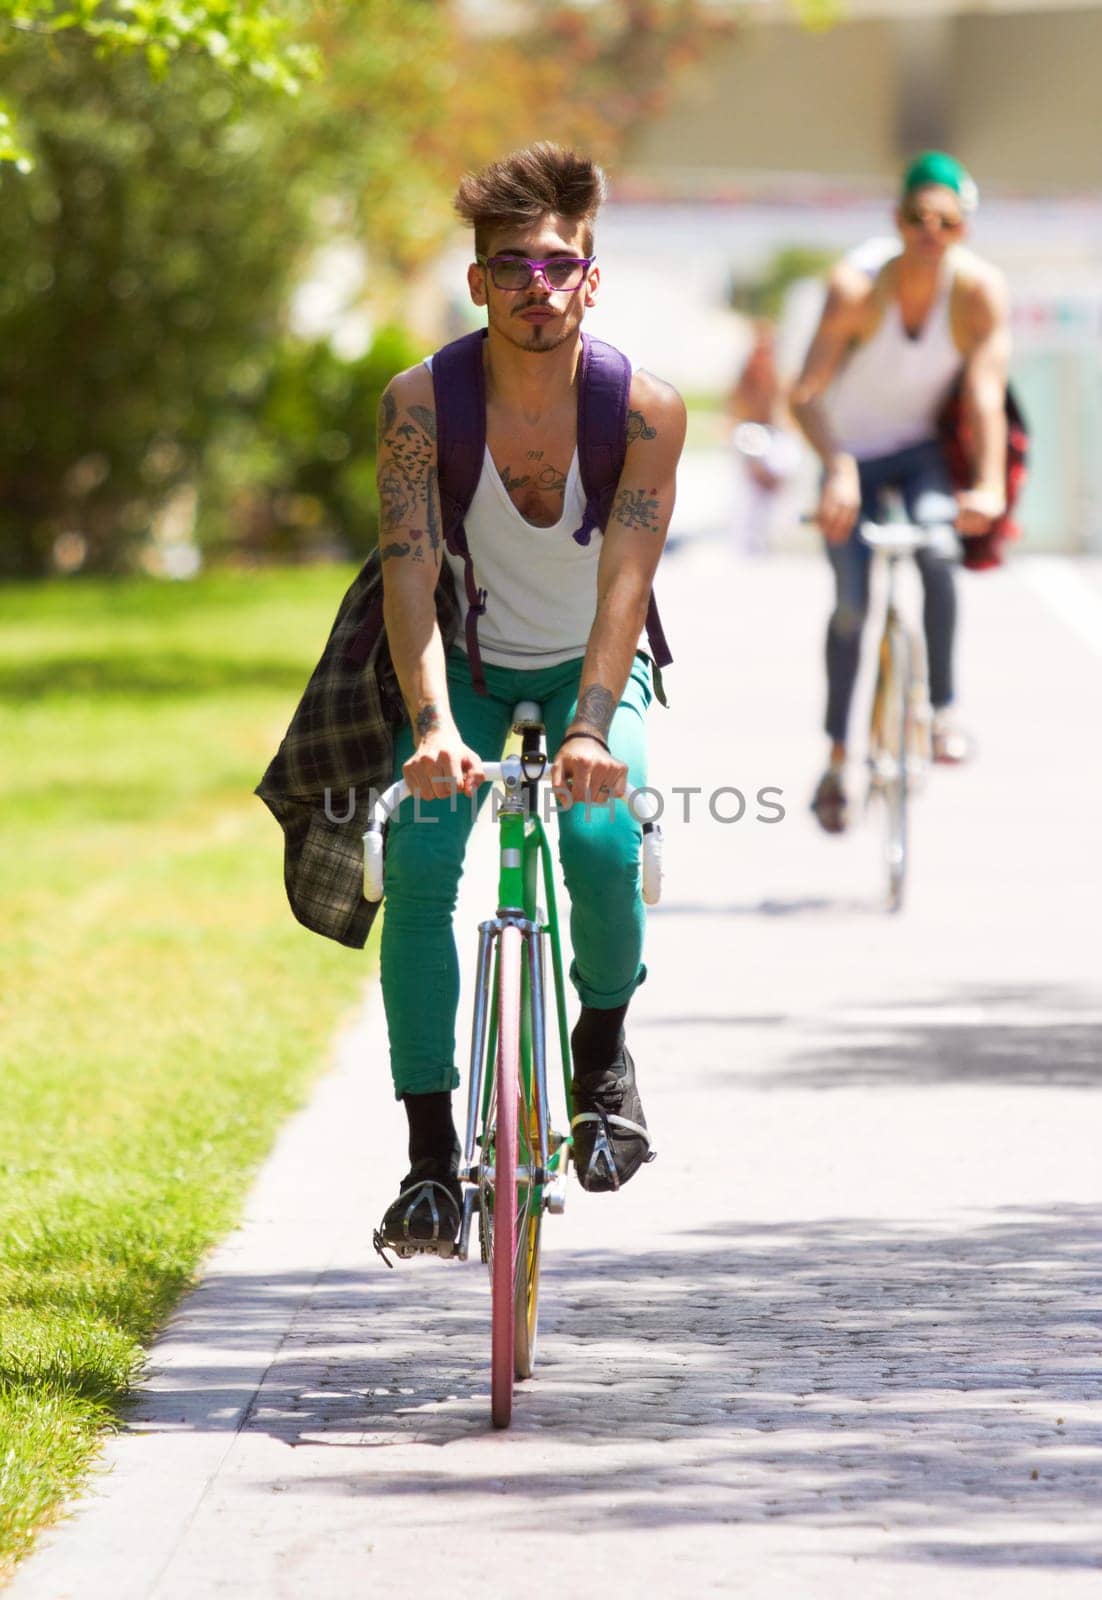 Bicycle, portrait and man or friends in city streetwear for college, university or outdoor travel in carbon footprint. Youth cycling or people in gen z fashion, bike for transport and park or campus.